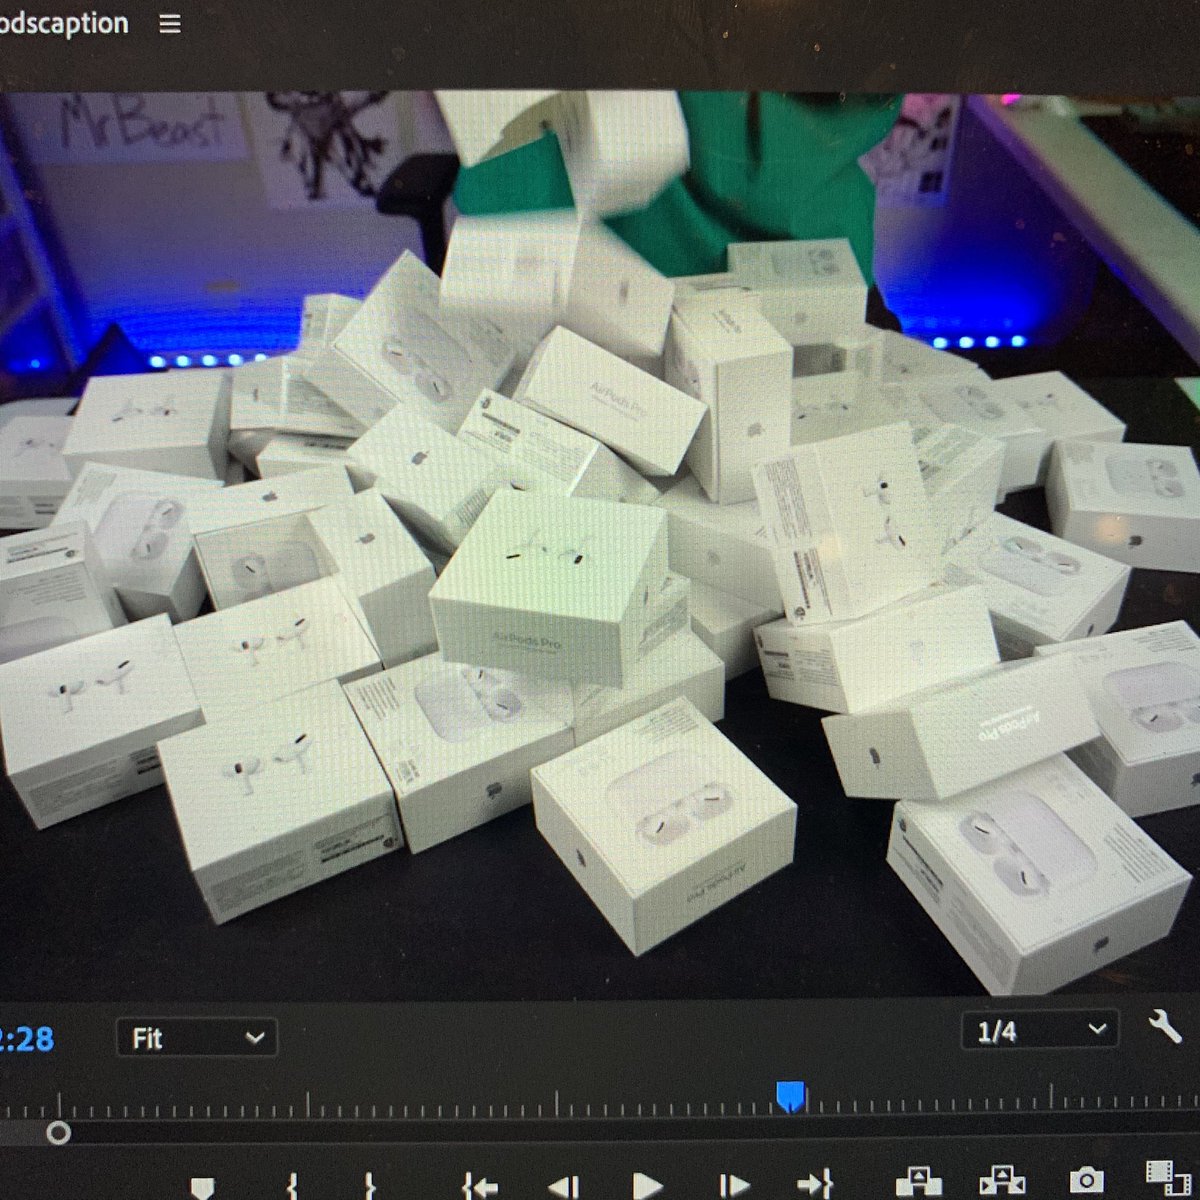 Tomorrow at 12:30 PM PST I am uploading a 100 custom airpods pro video! First 3 comments will win custom airpods and the rest will be given to you guys on Christmas 😊❤️ Tell everyone to watch it!🤪 luv all of you❤️🌎